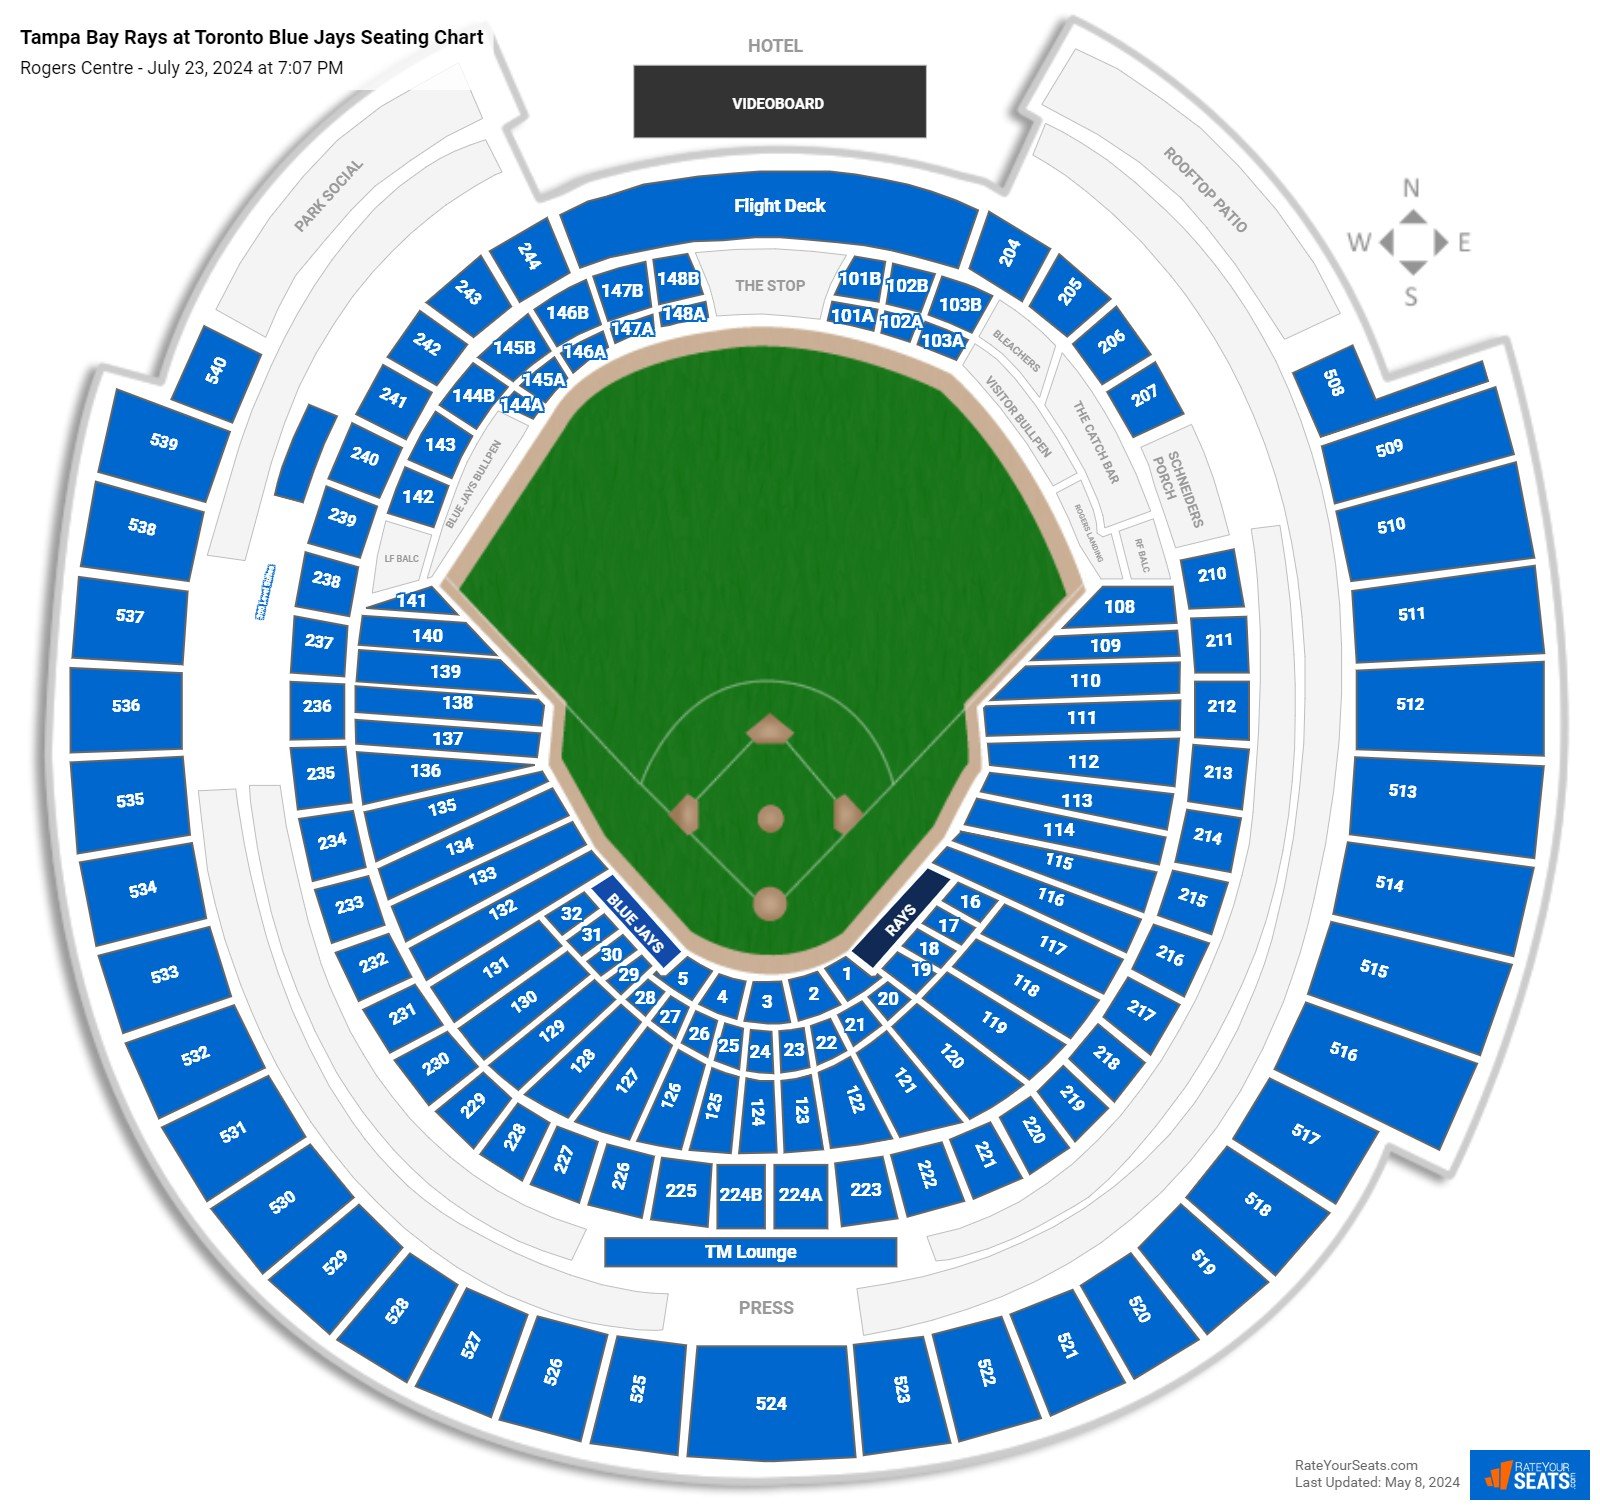 Tampa Bay Rays at Toronto Blue Jays seating chart Rogers Centre